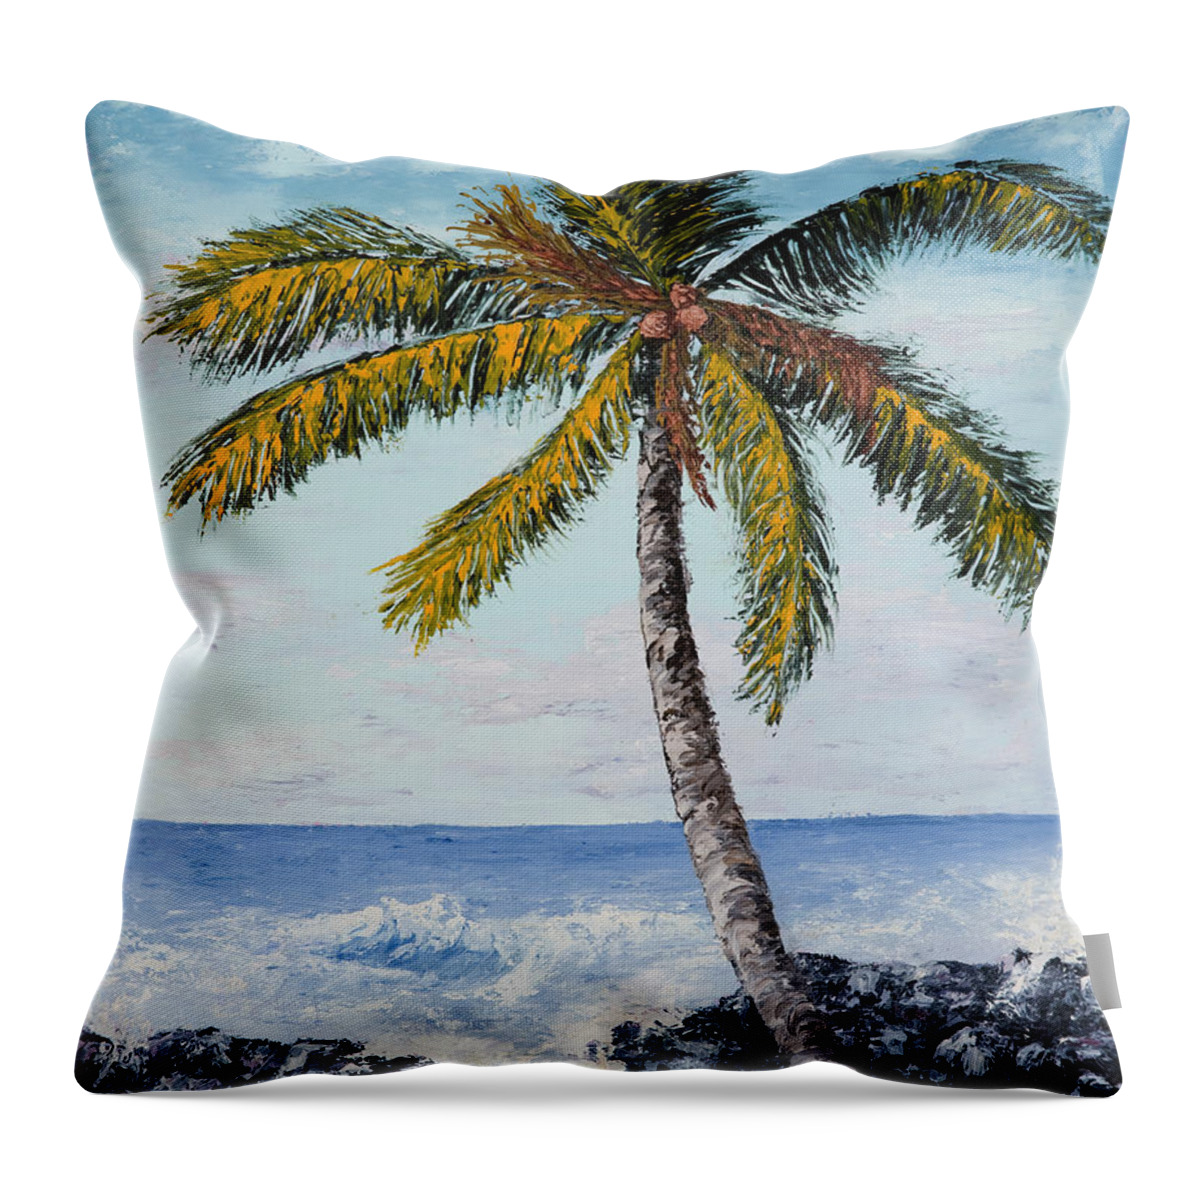 Seascape Throw Pillow featuring the painting Hawaiian Island Palm by Darice Machel McGuire